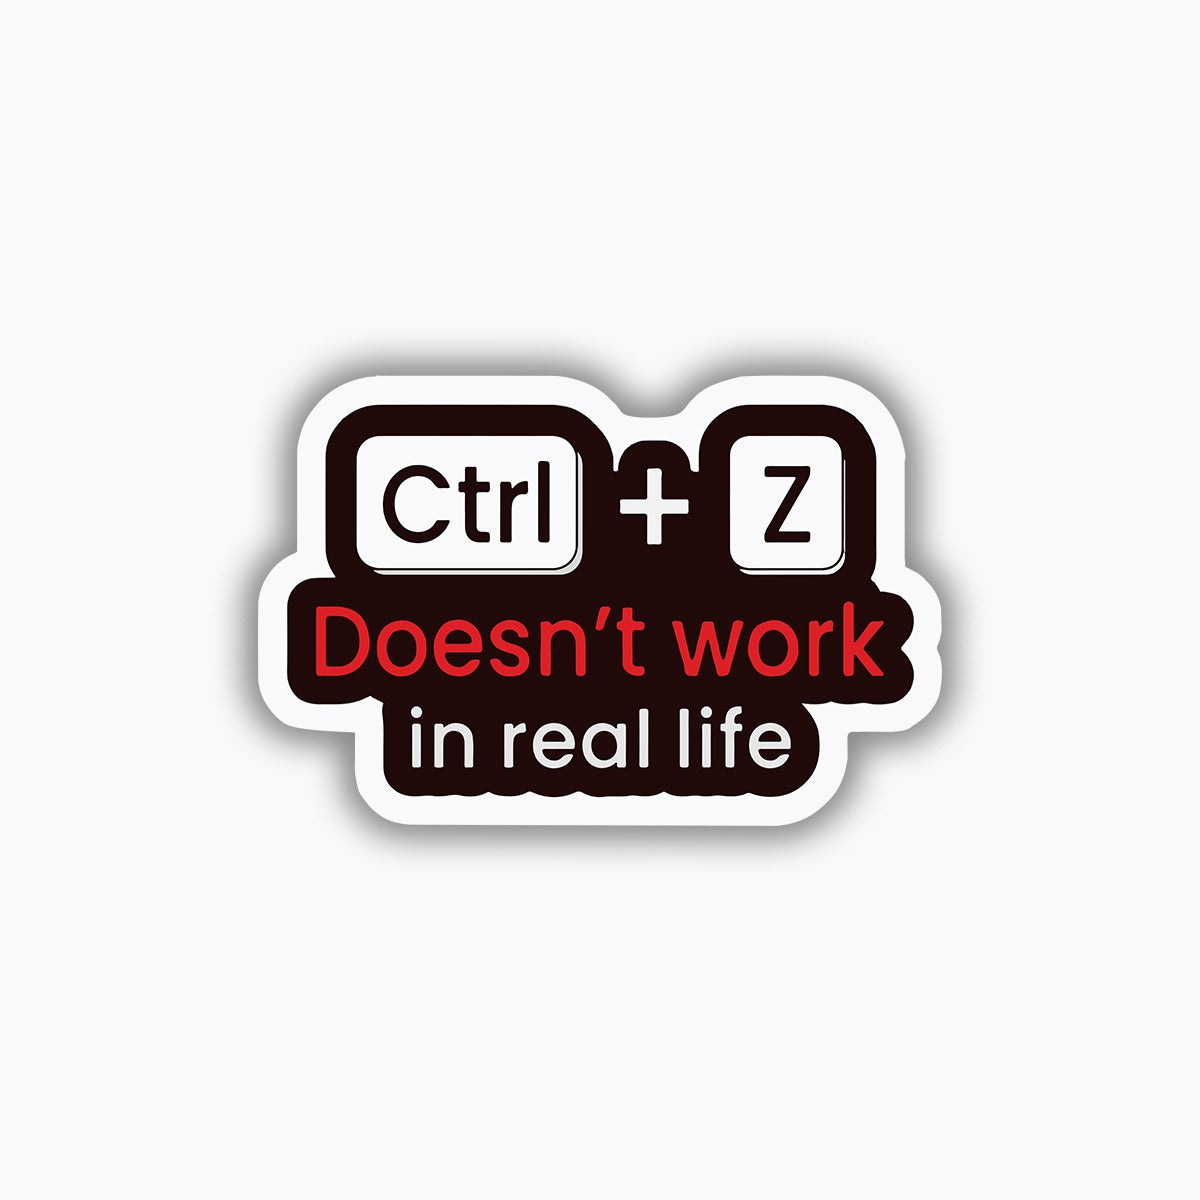 Ctrl+z doesn't work in real life